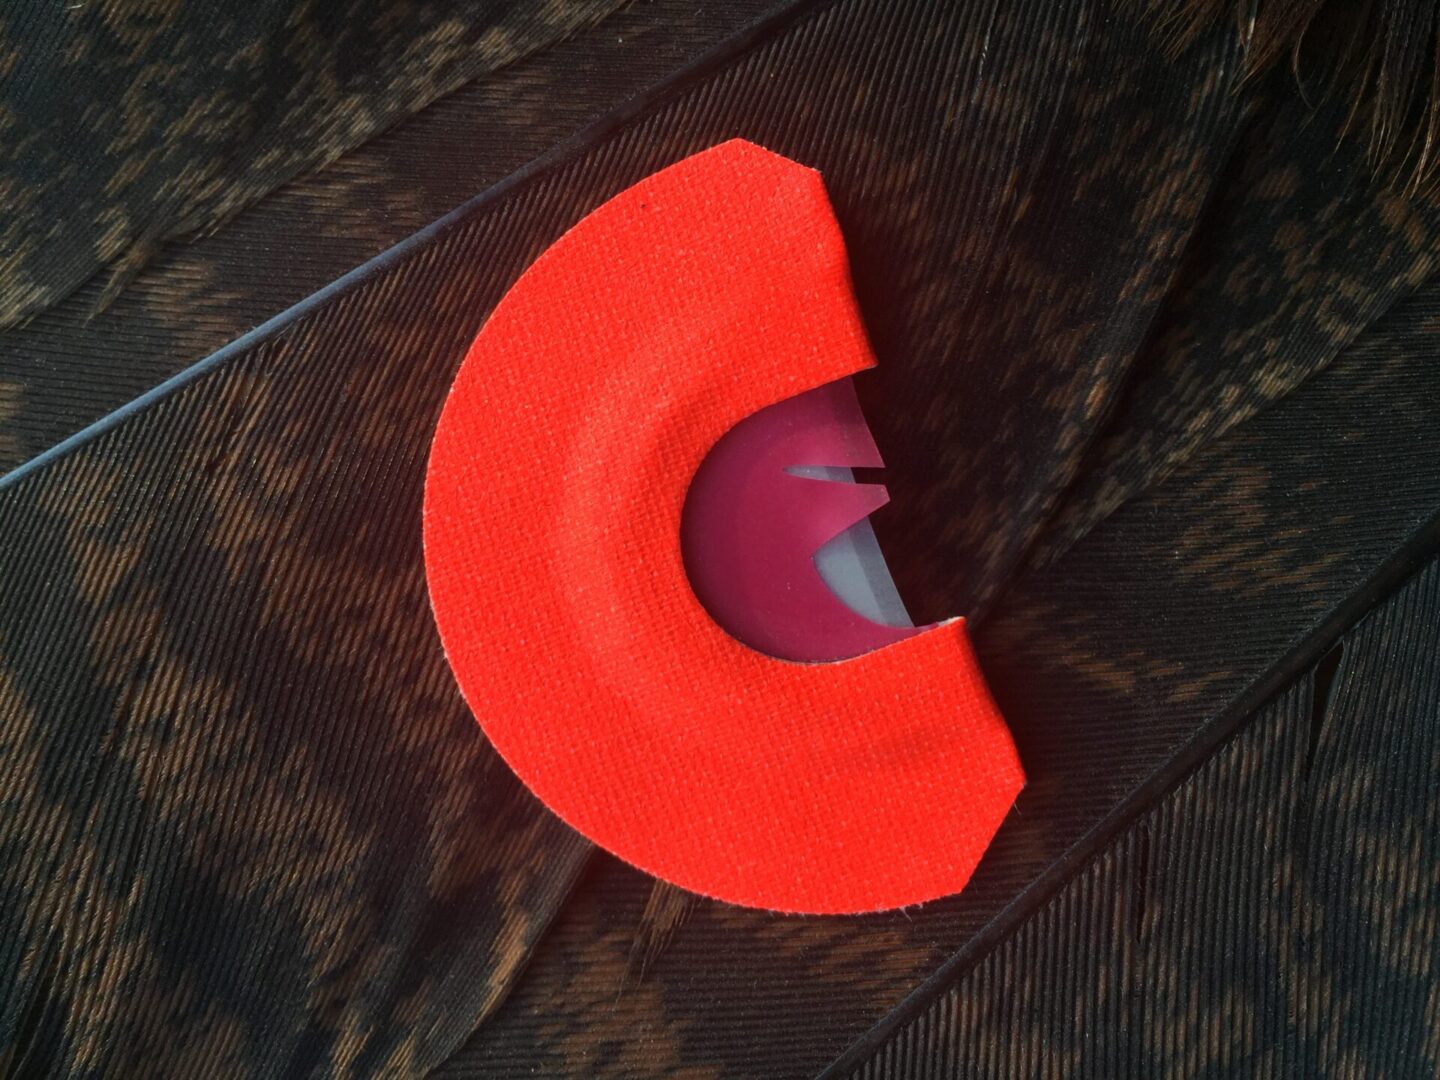 A red object is laying on the ground